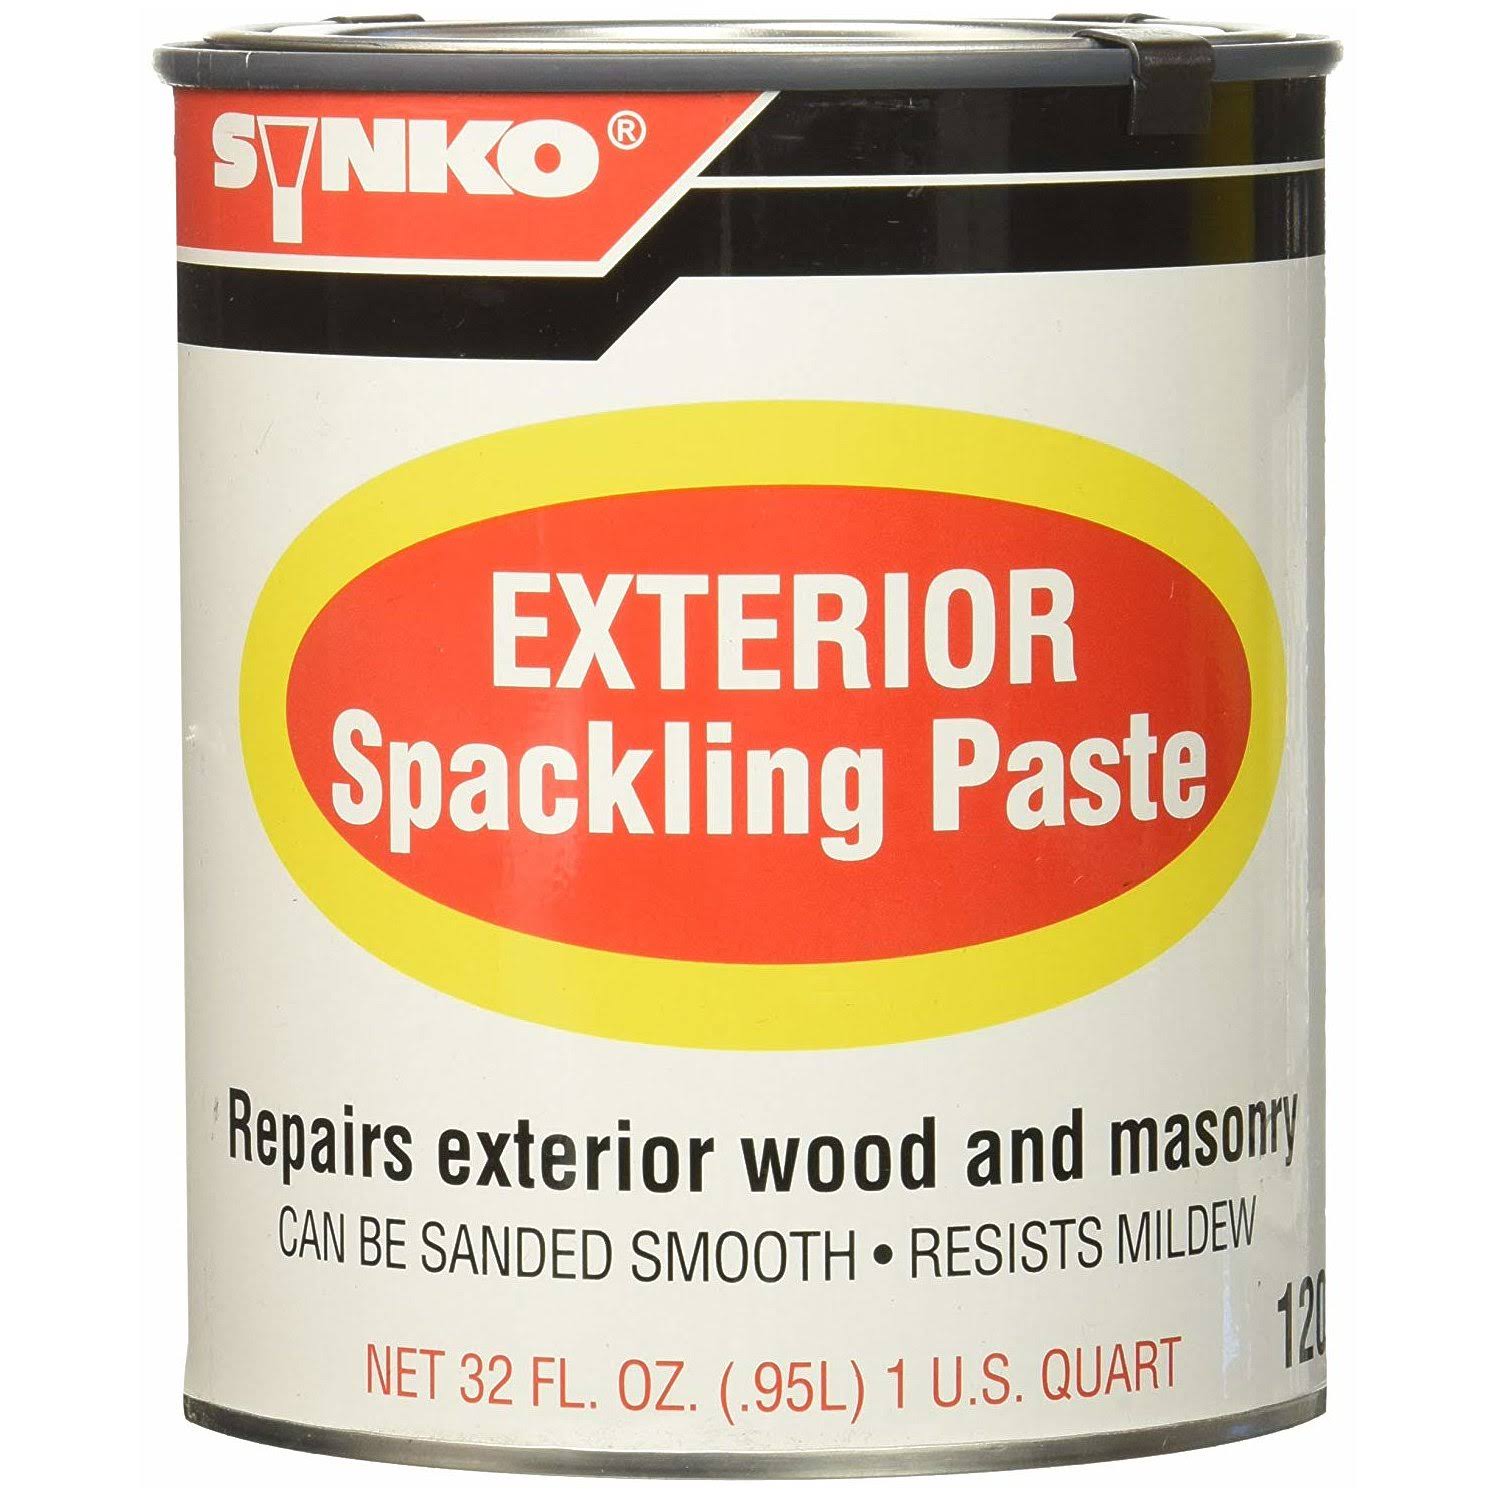 Synkoloid Exterior Spackling Paste QT | Garage | Delivery Guaranteed | Free Shipping On All Orders | Best Price Guarantee